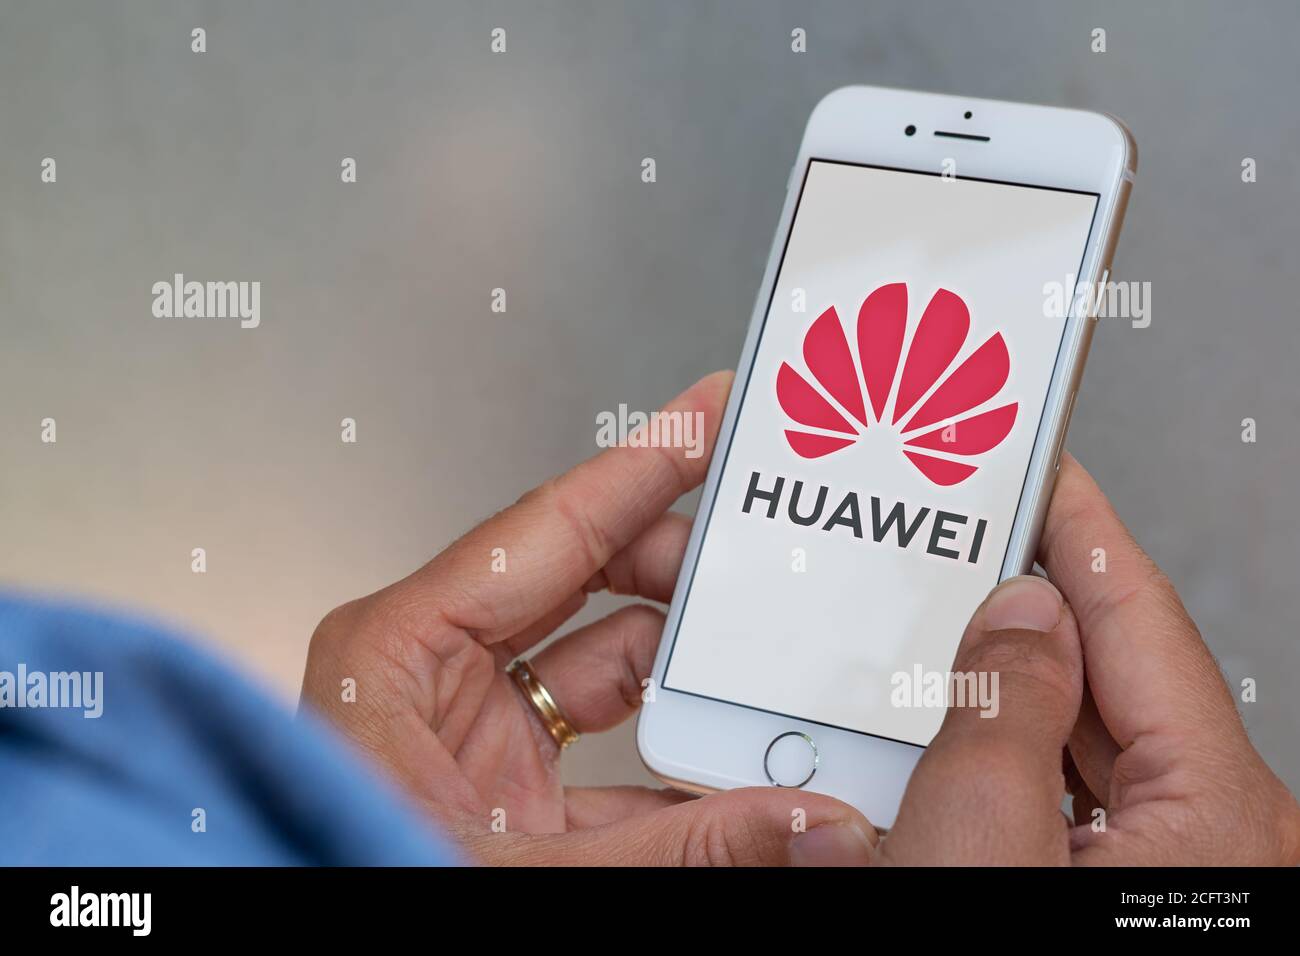 Slaapzaal Knipperen Belofte Guilherand-Granges, France - June 16, 2020. Smartphone with Huawei logo.  Huawei Technologies Co. Ltd. Chinese multinational telecommunication and  elec Stock Photo - Alamy